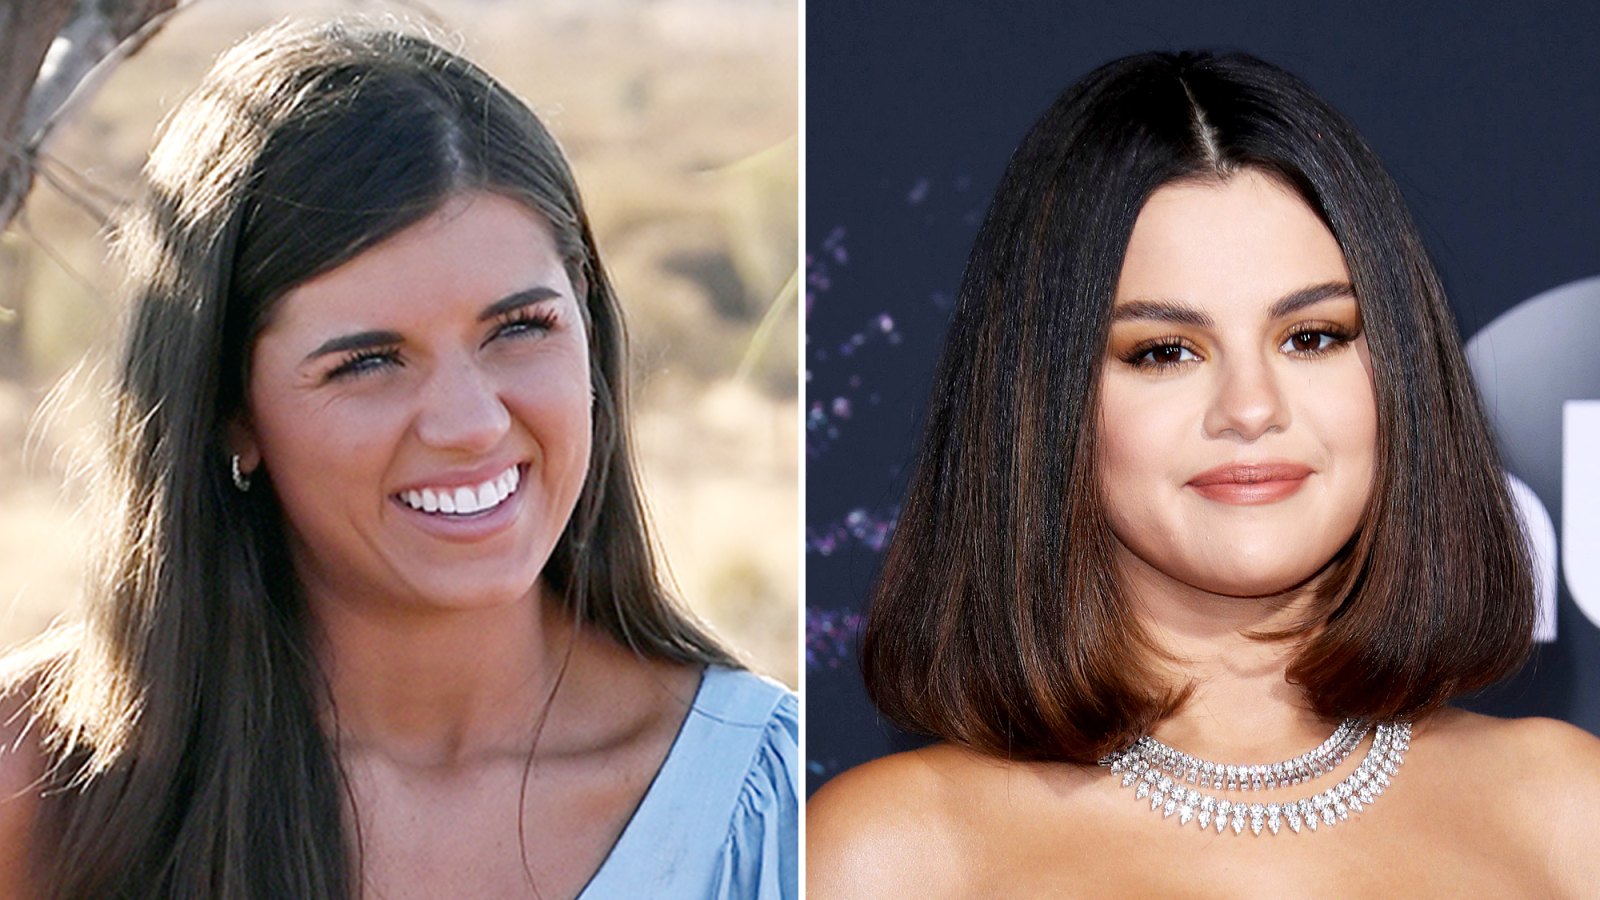 Madison Prewett Says Faith Is the Foundation of Her Friendship With Selena Gomez